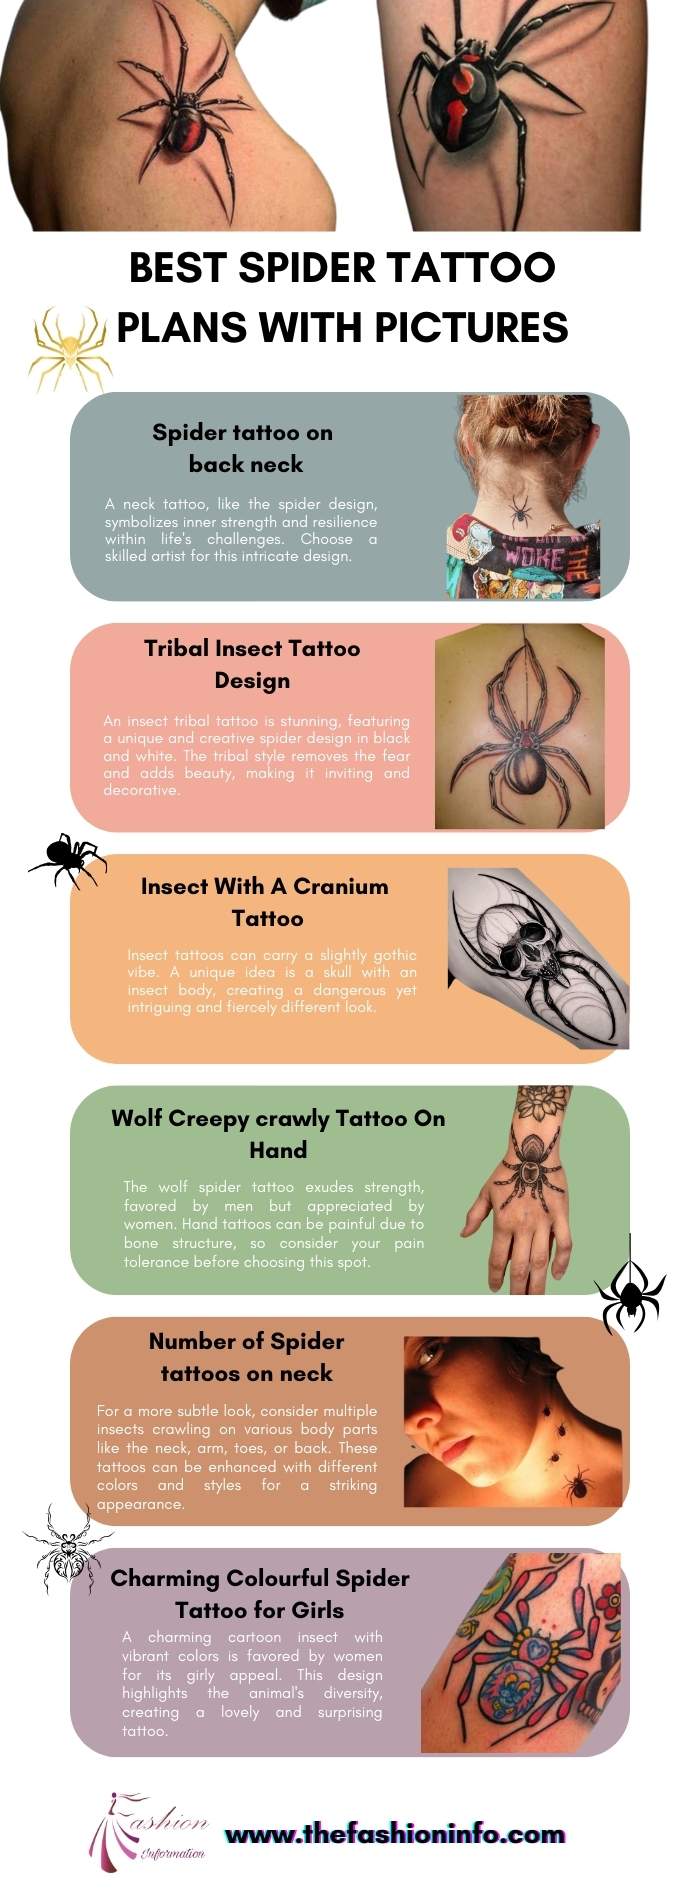 Best Spider Tattoo Plans With Pictures